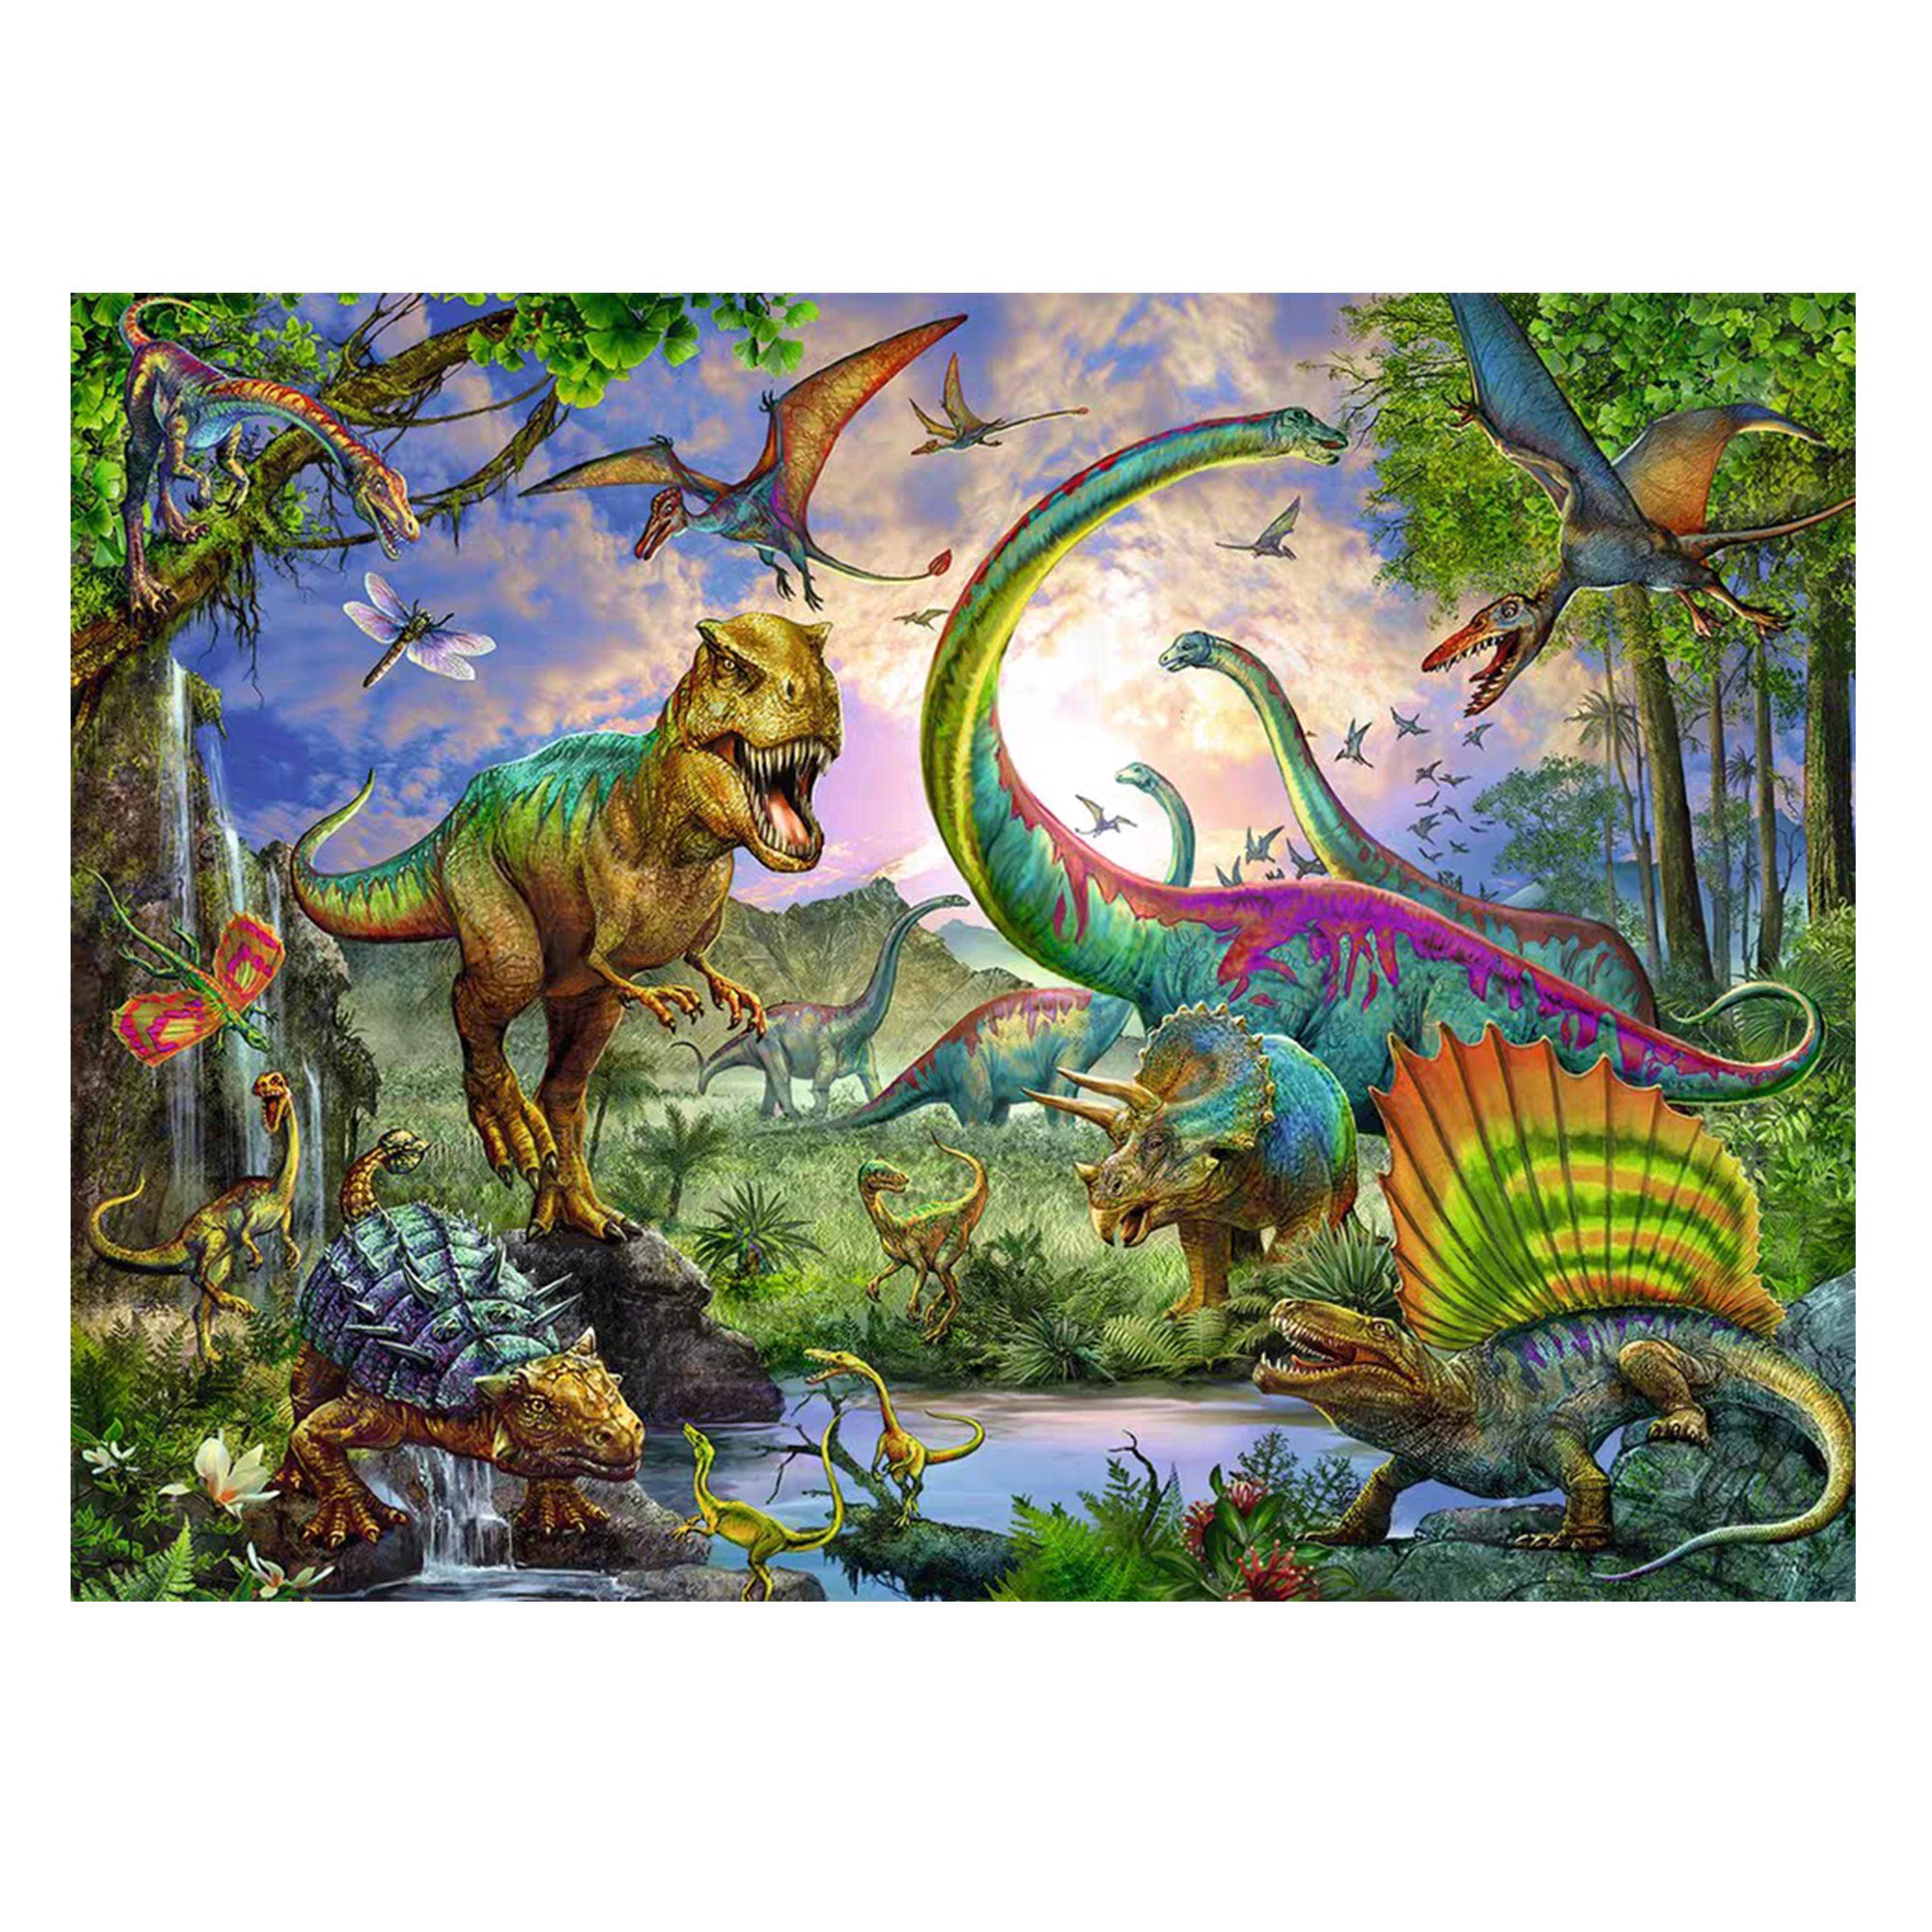 4 GMSP Dinosaur 5D Diamond Embroidery Painting DIY Painting Cross Stitch Home Decorations Kids Presents Birthday Gift.